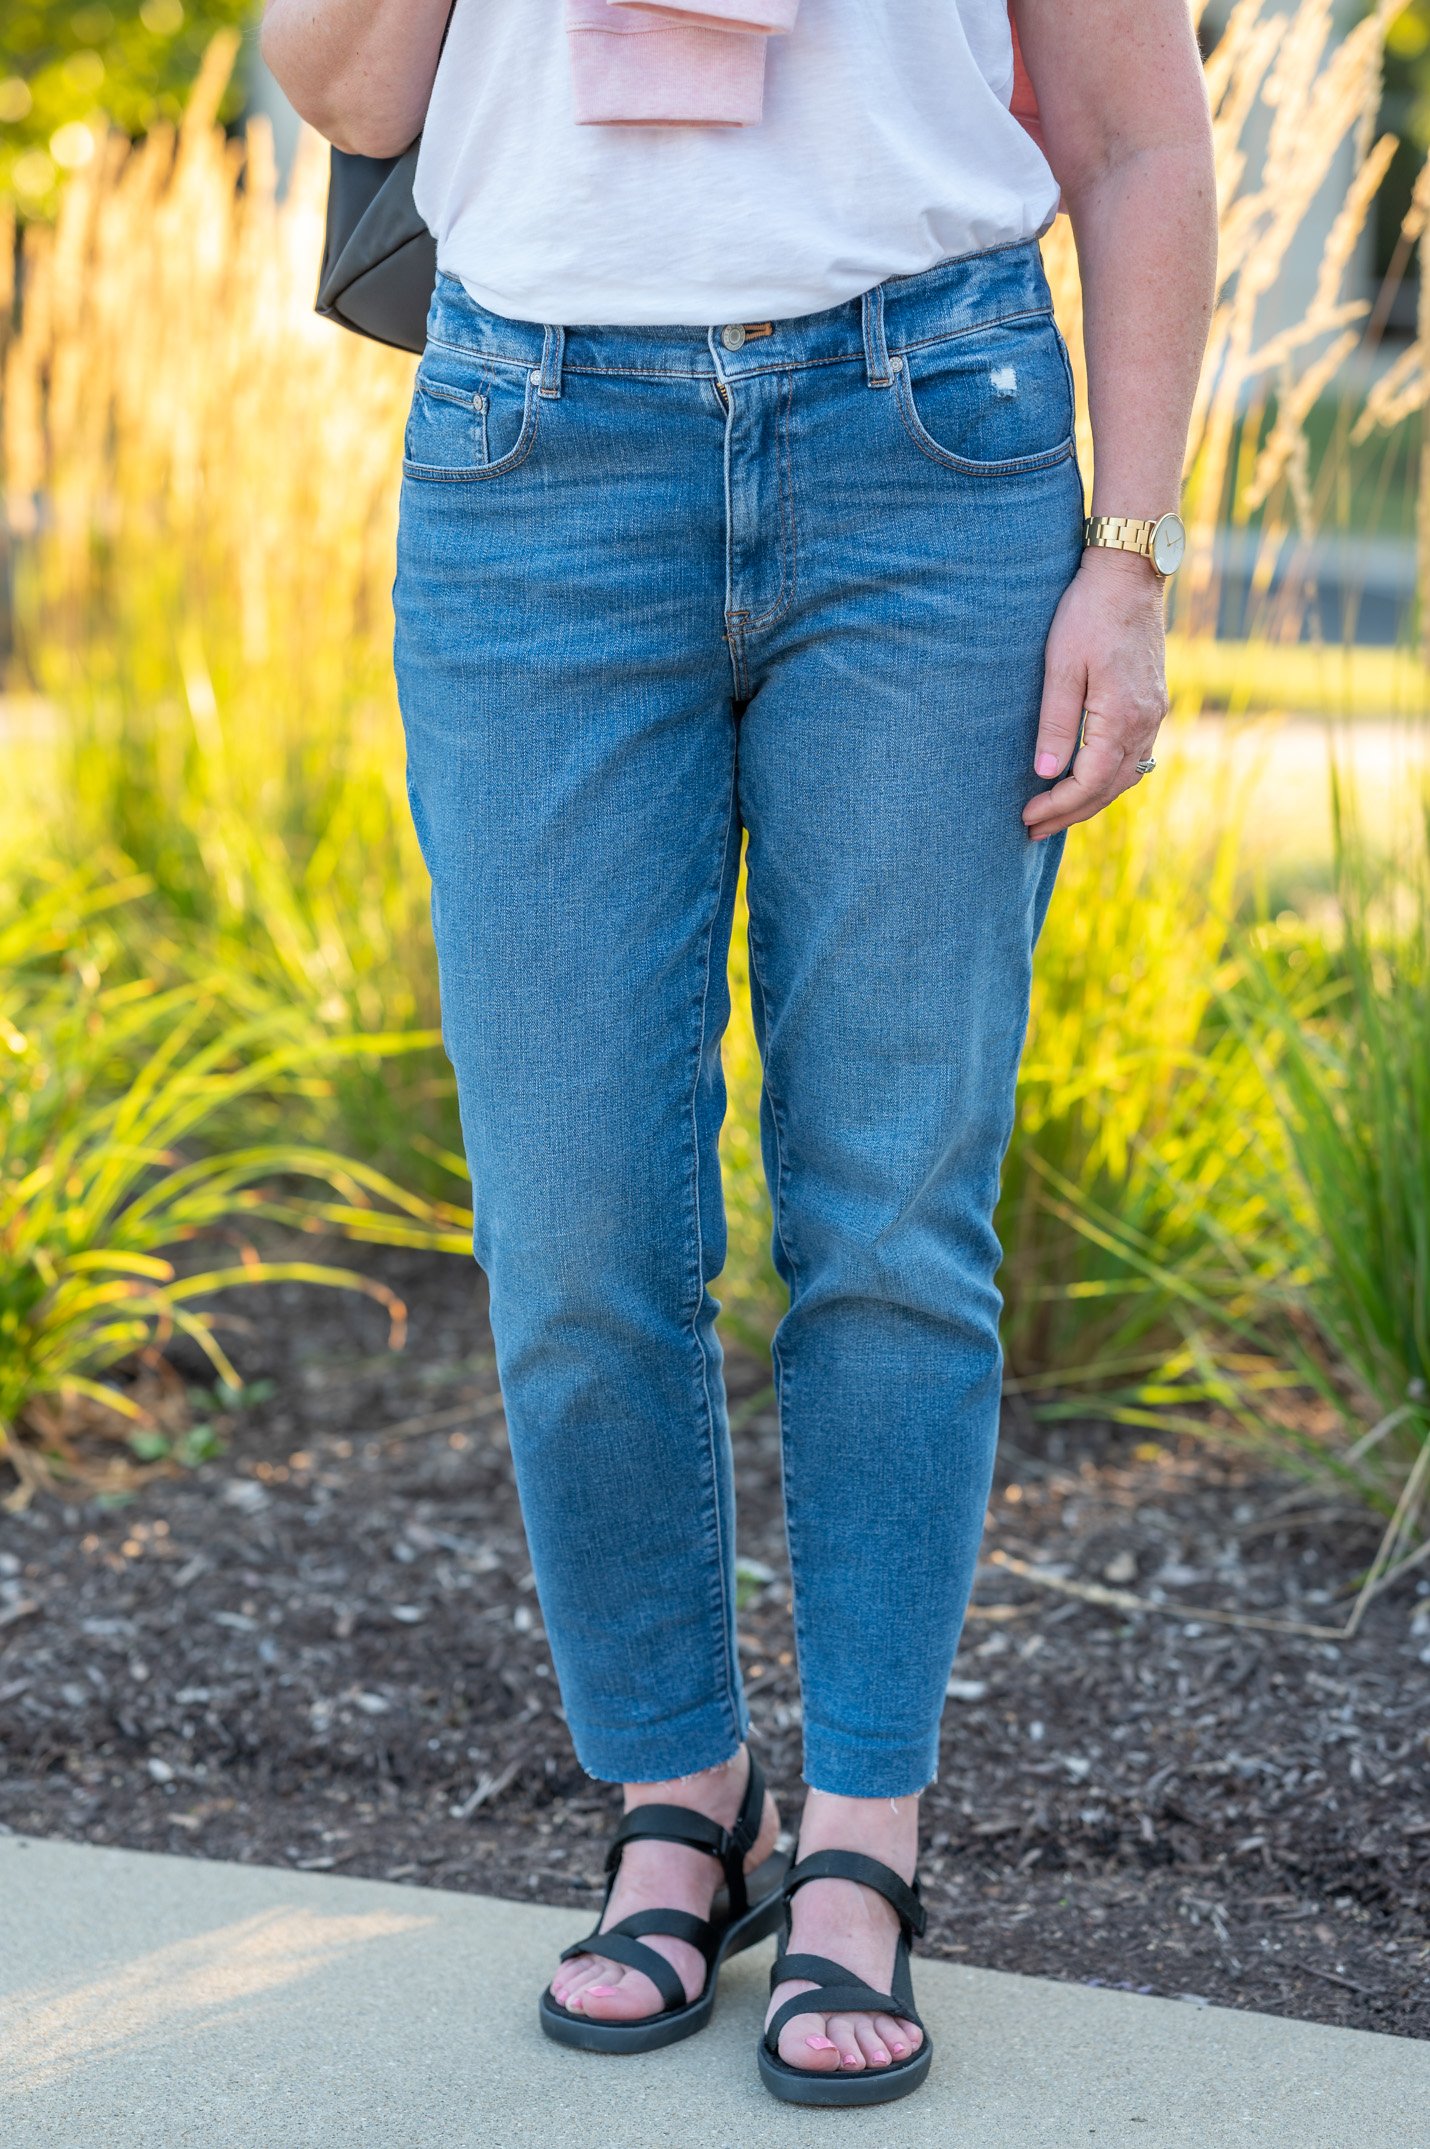 Relaxed Everyday Jeans from Talbots